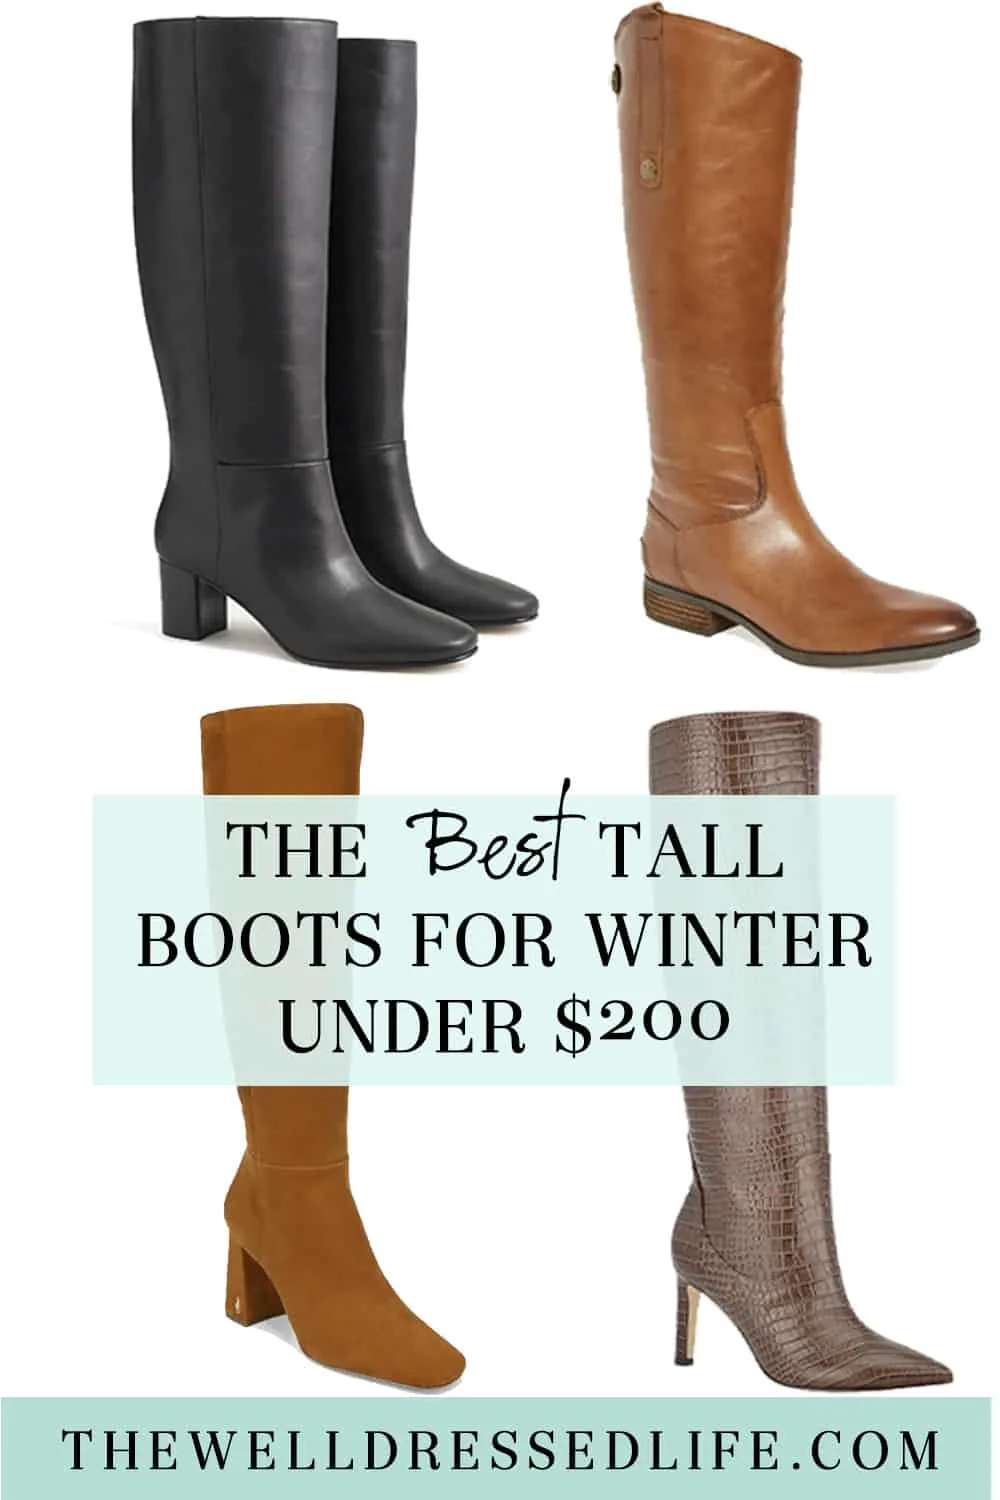 The Best Tall Boots Under $200